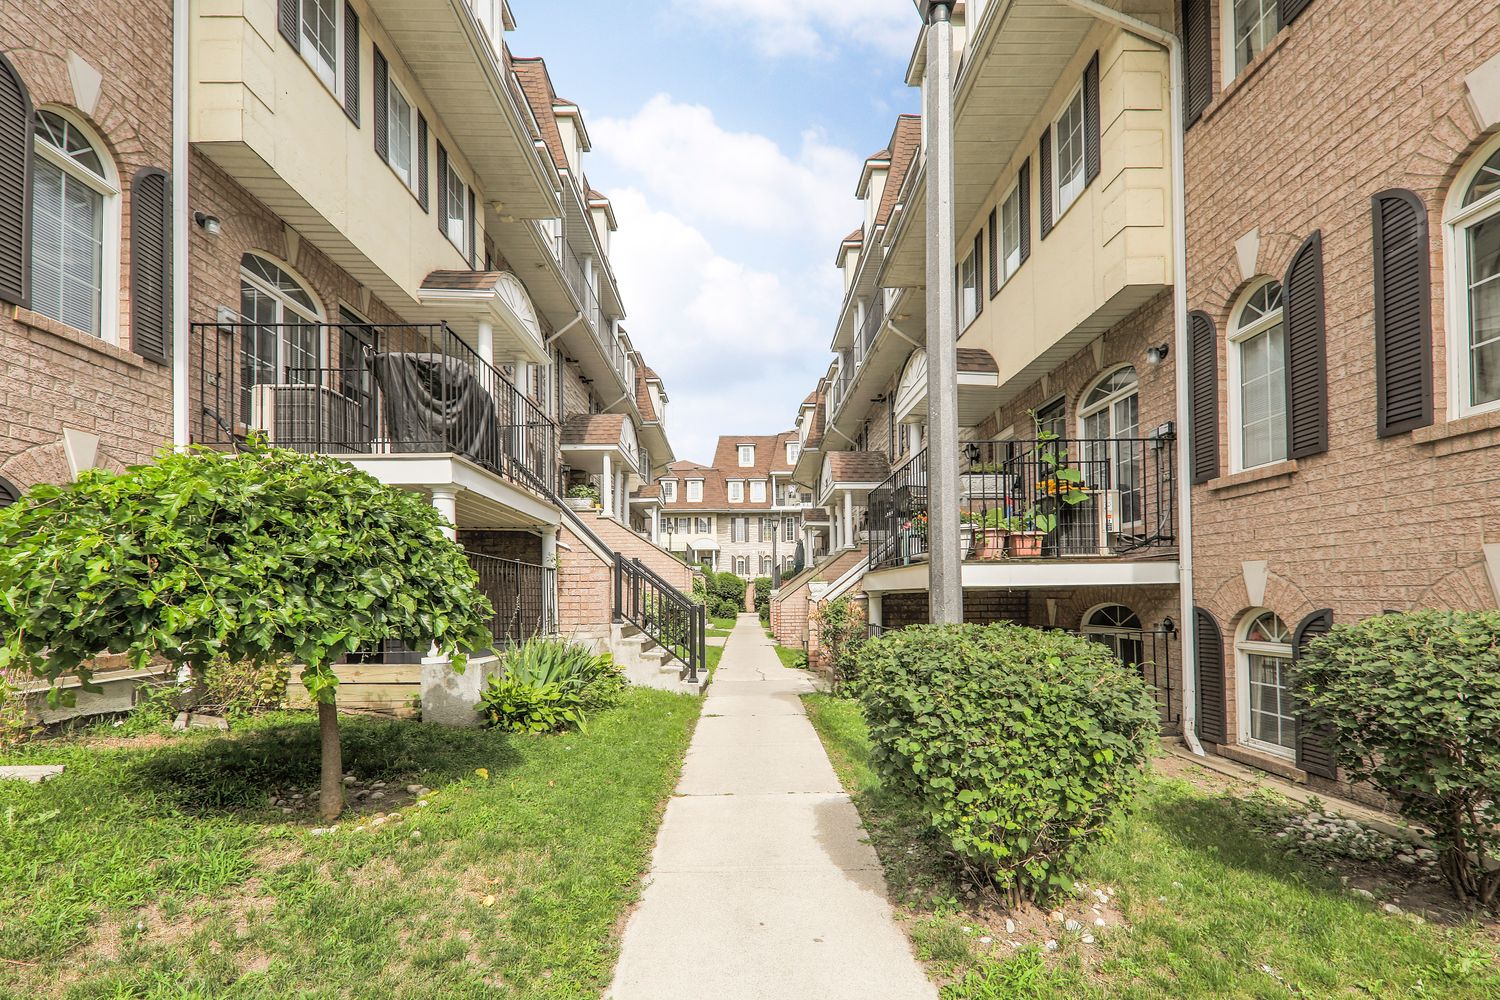 50-74 Sidney Belsey Crescent. Sidney Belsey Crescent Townhomes is located in  York Crosstown, Toronto - image #3 of 4